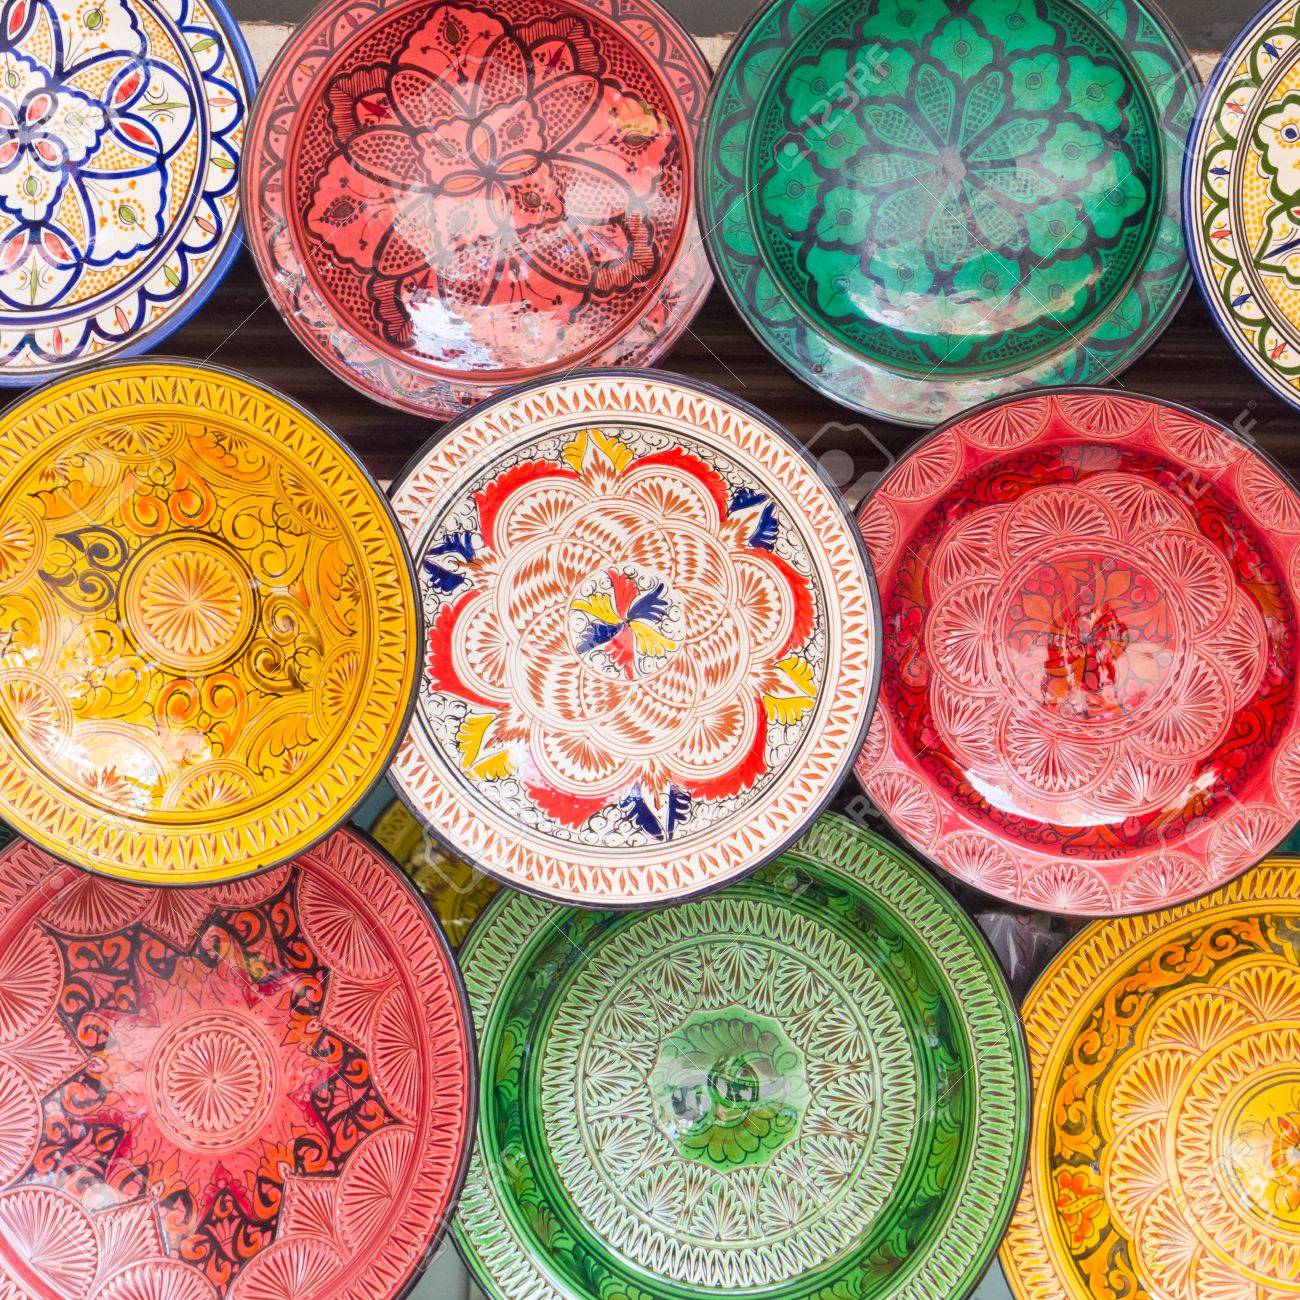 https://previews.123rf.com/images/kasto/kasto1402/kasto140200033/25987982-traditional-arabic-handcrafted-colorful-decorated-plates-shot-at-the-market-in-marrakesh-morocco-afr.jpg